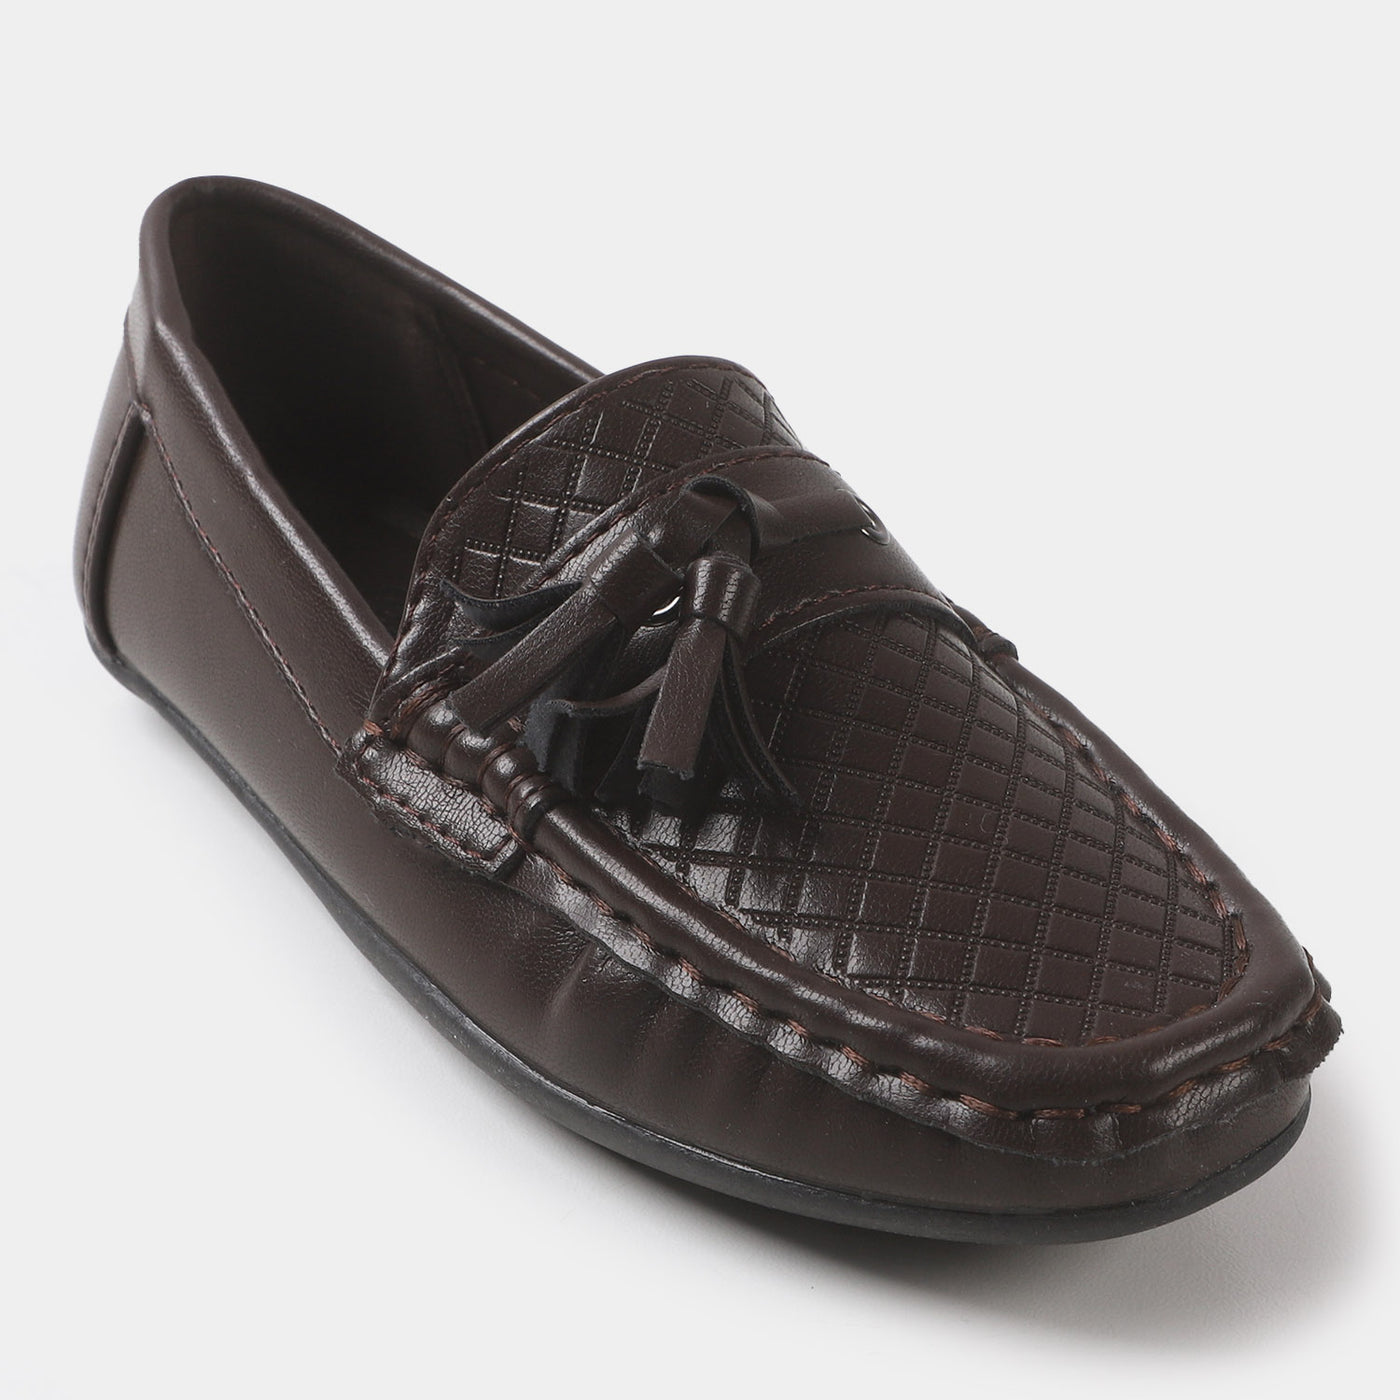 Boys loafers 202109-5 - COFFEE